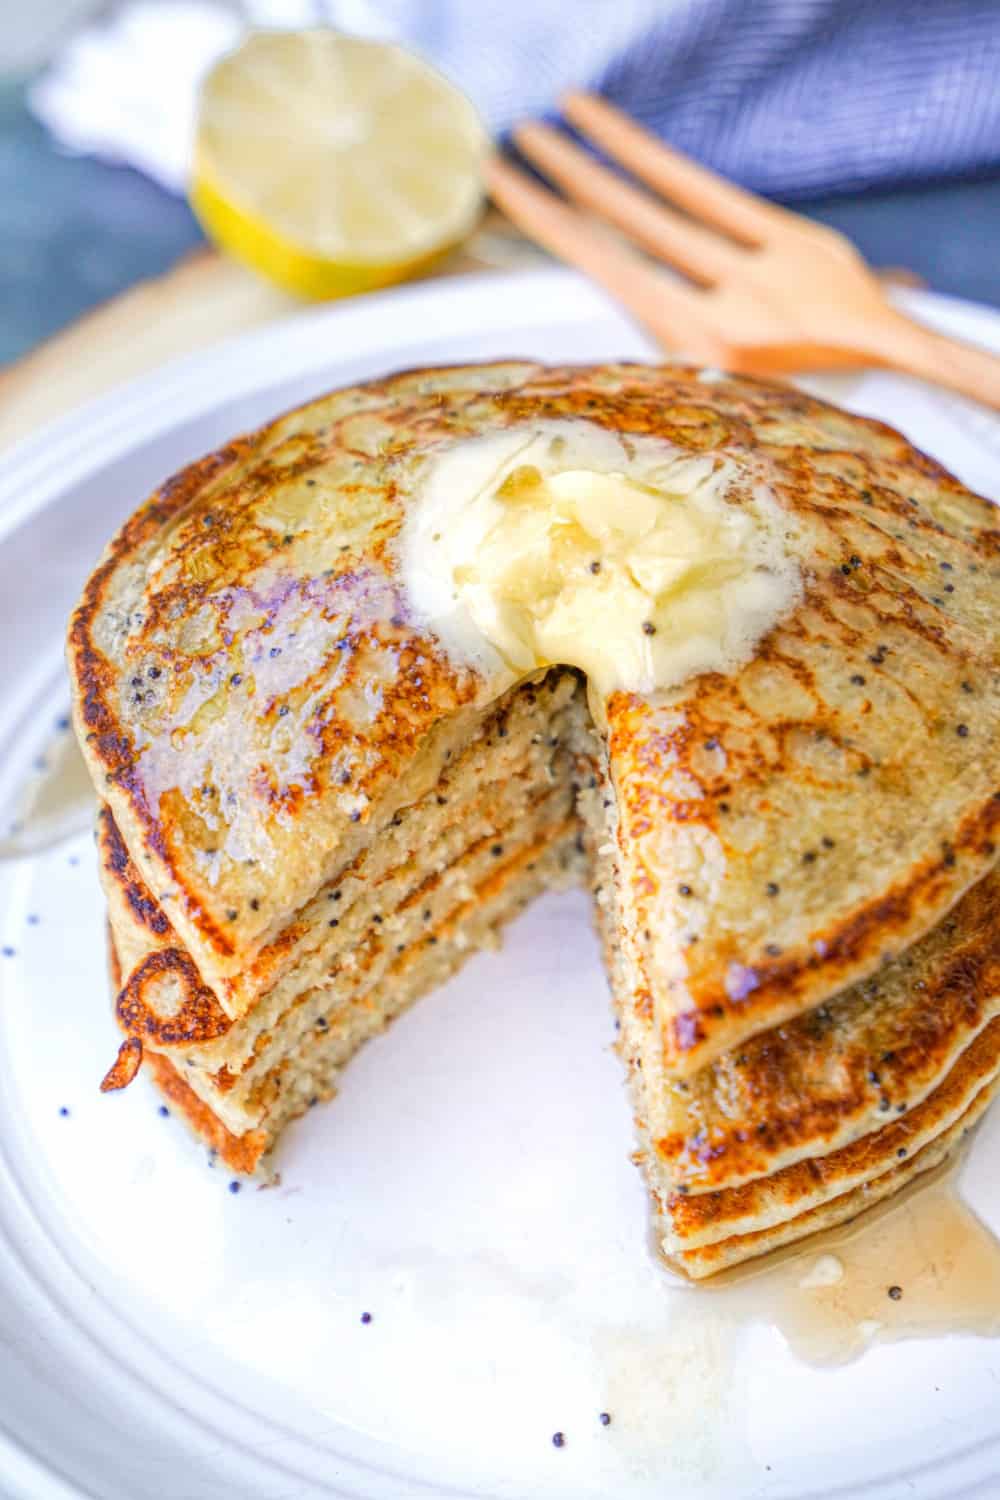 Vegan Lemon Poppyseed Pancakes Stacked with Syrup and Butter